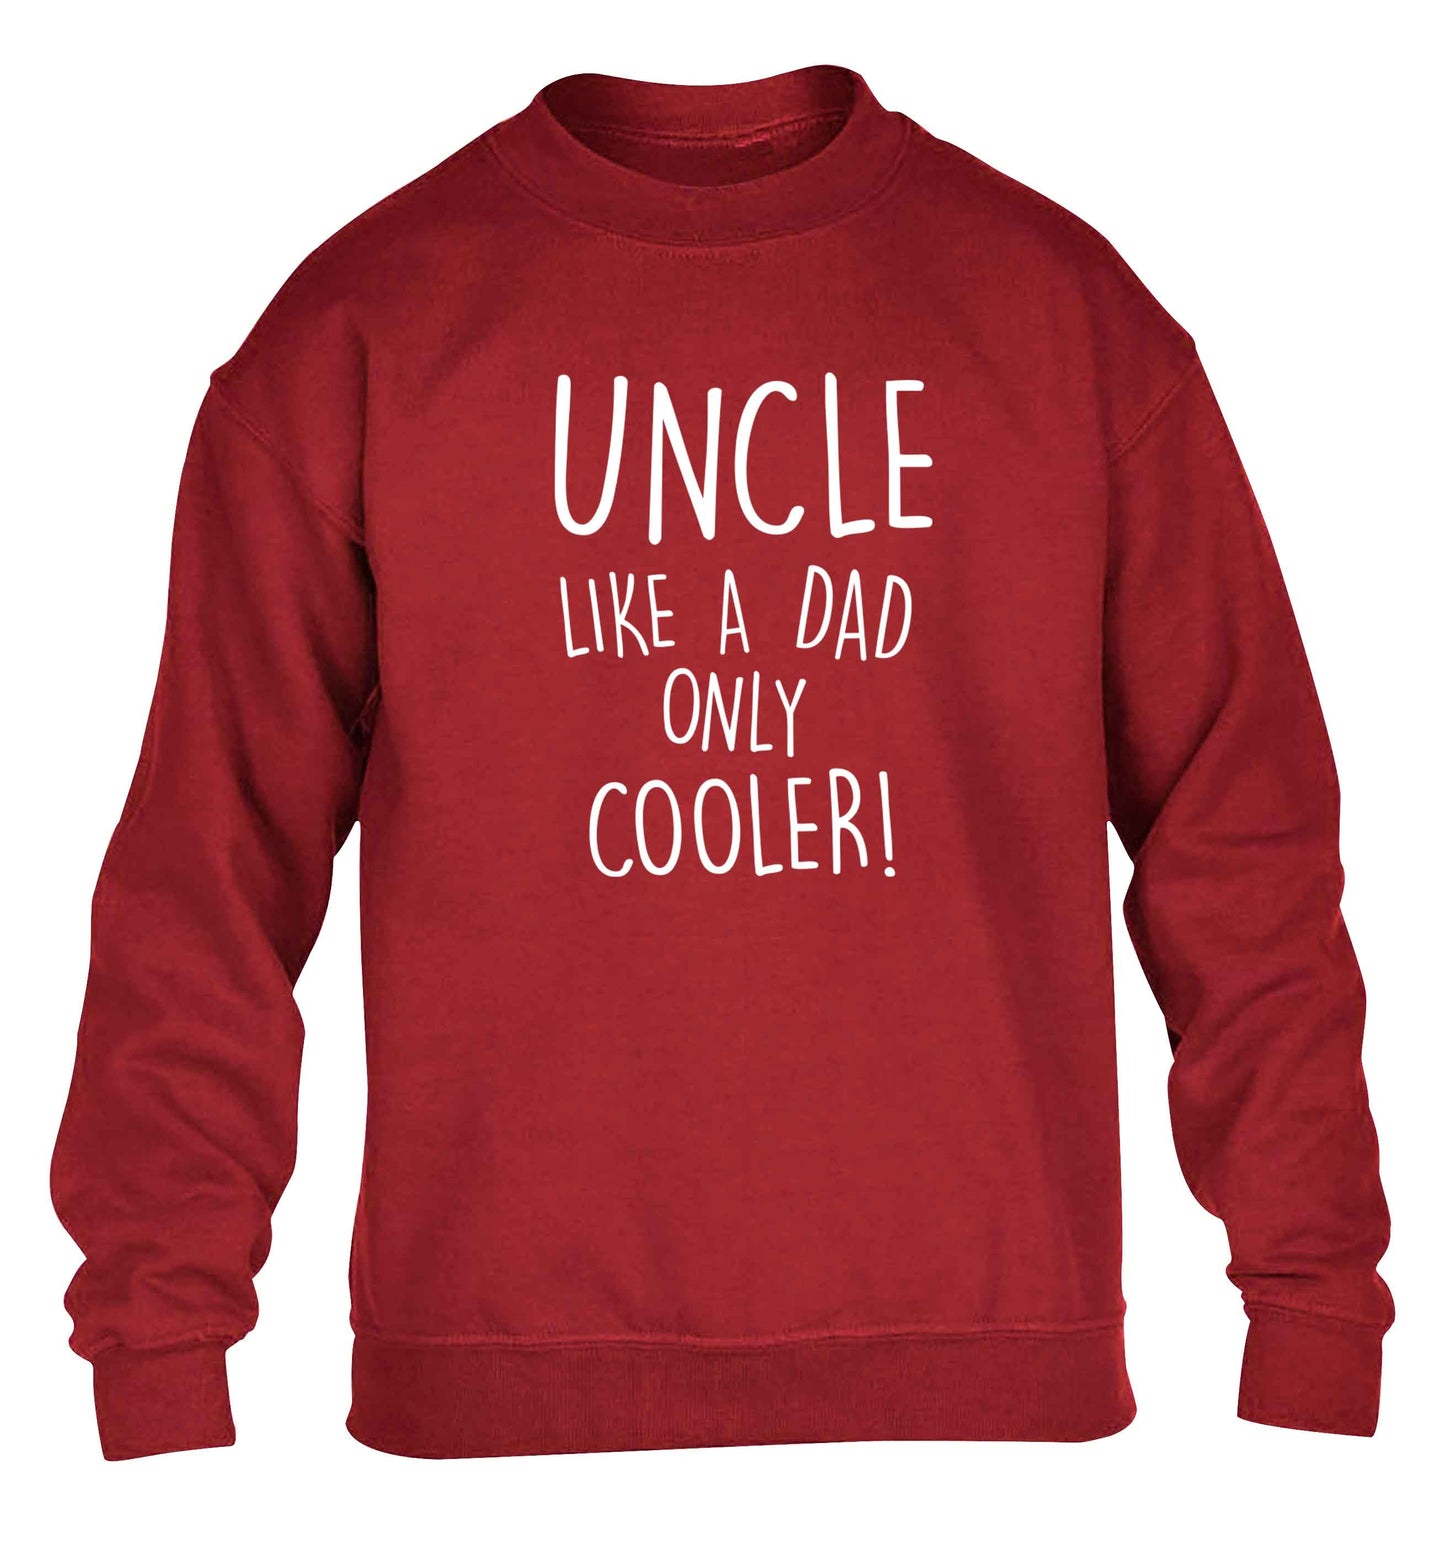 Uncle like a dad only cooler children's grey sweater 12-13 Years